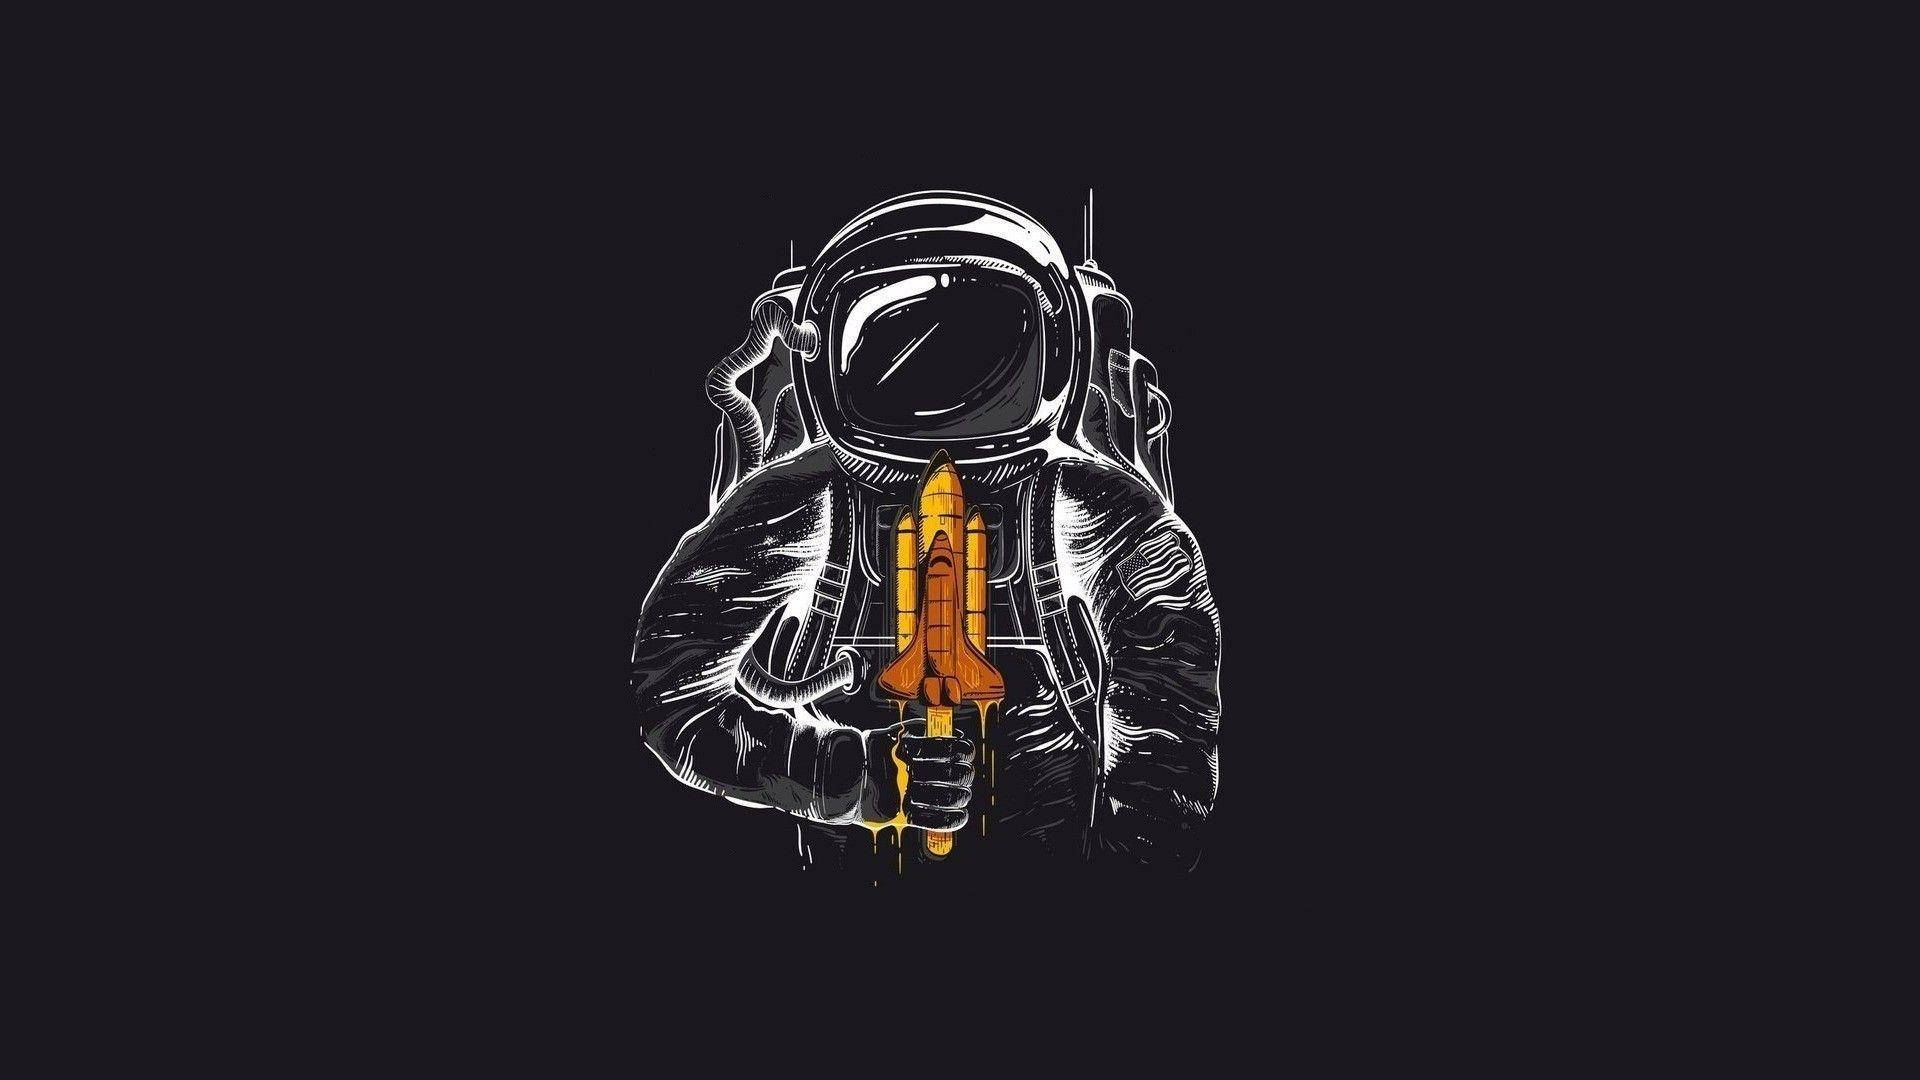 Astronaut Aesthetic With Spaceship Popicle Background